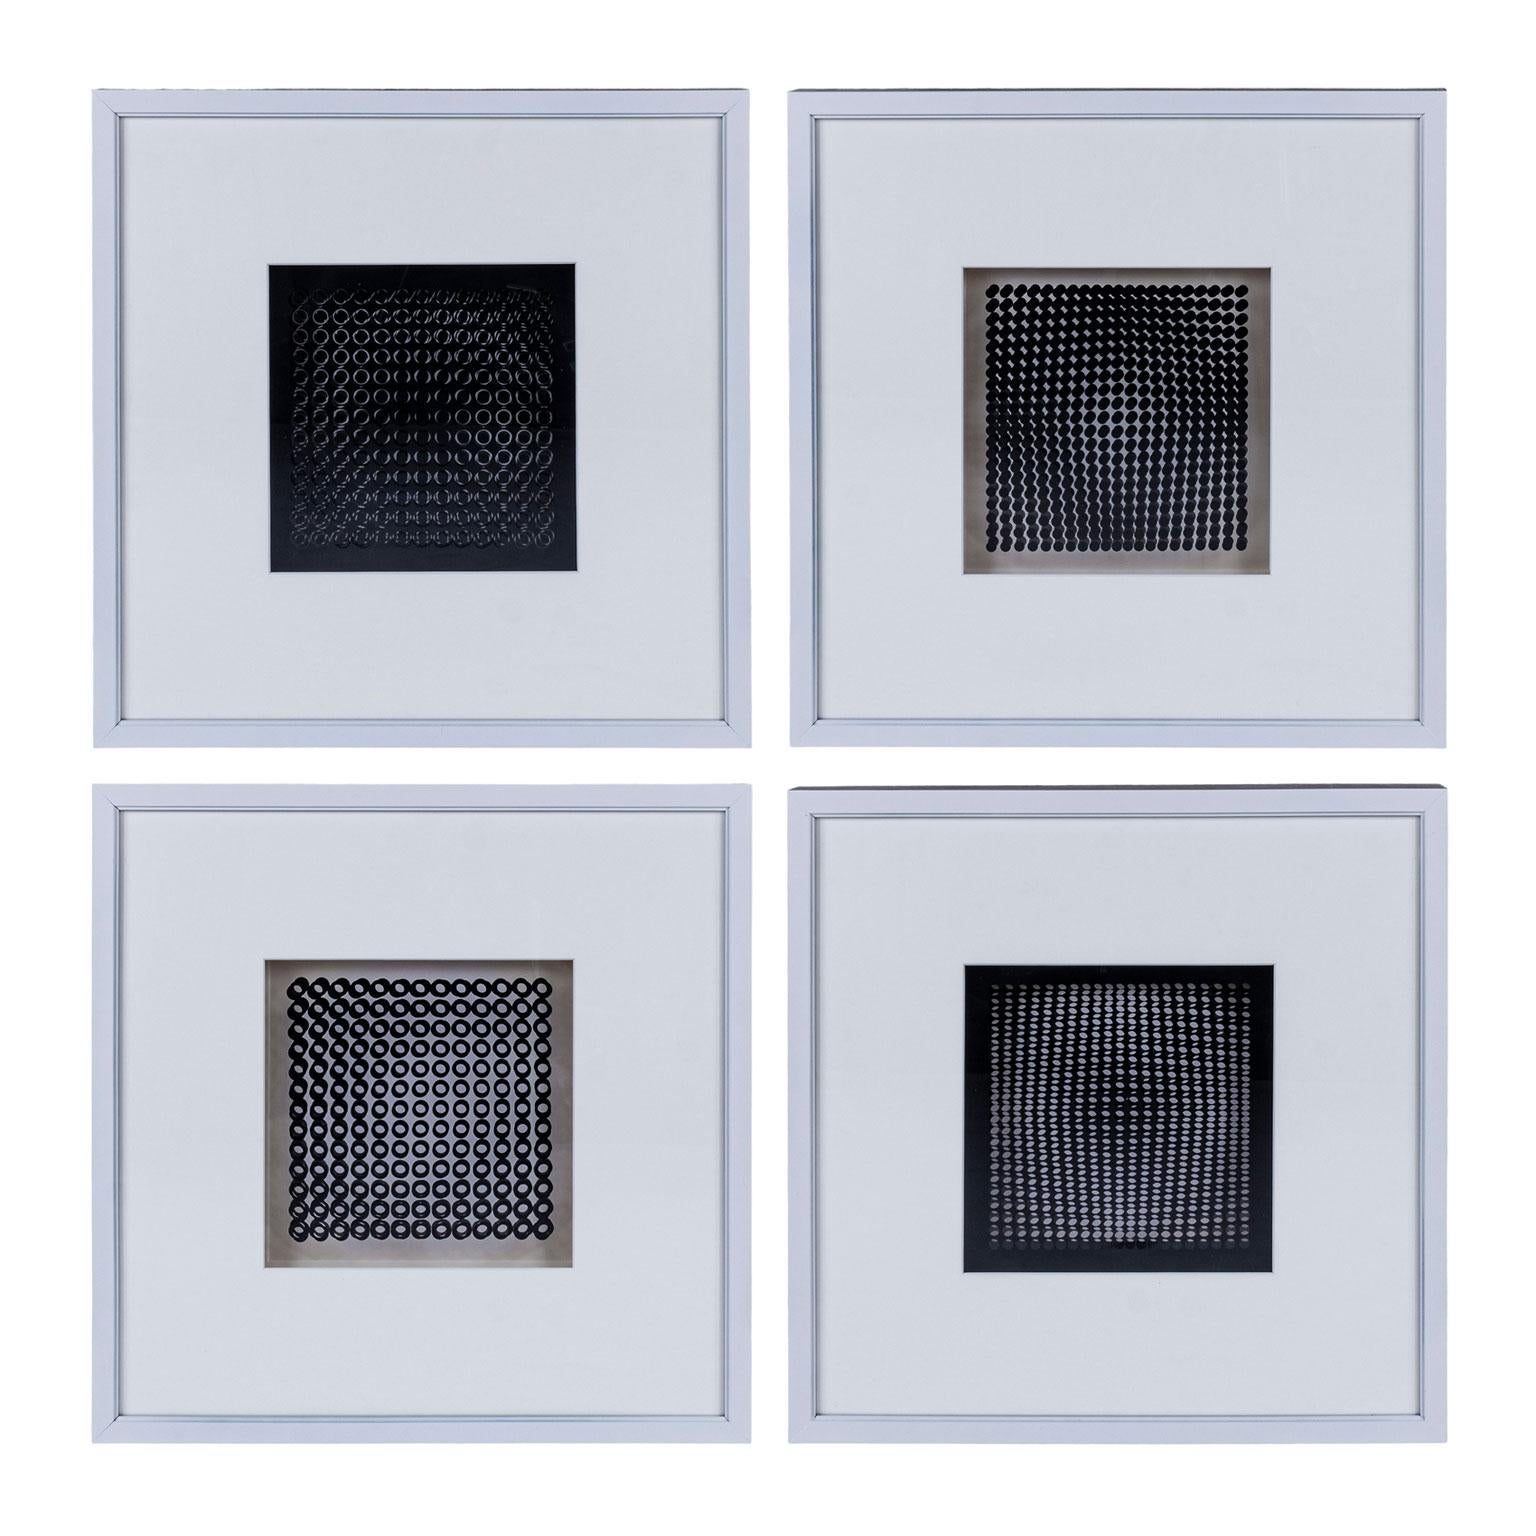 Swiss Four Vasarely Prints, Oeuvres Profondes For Sale